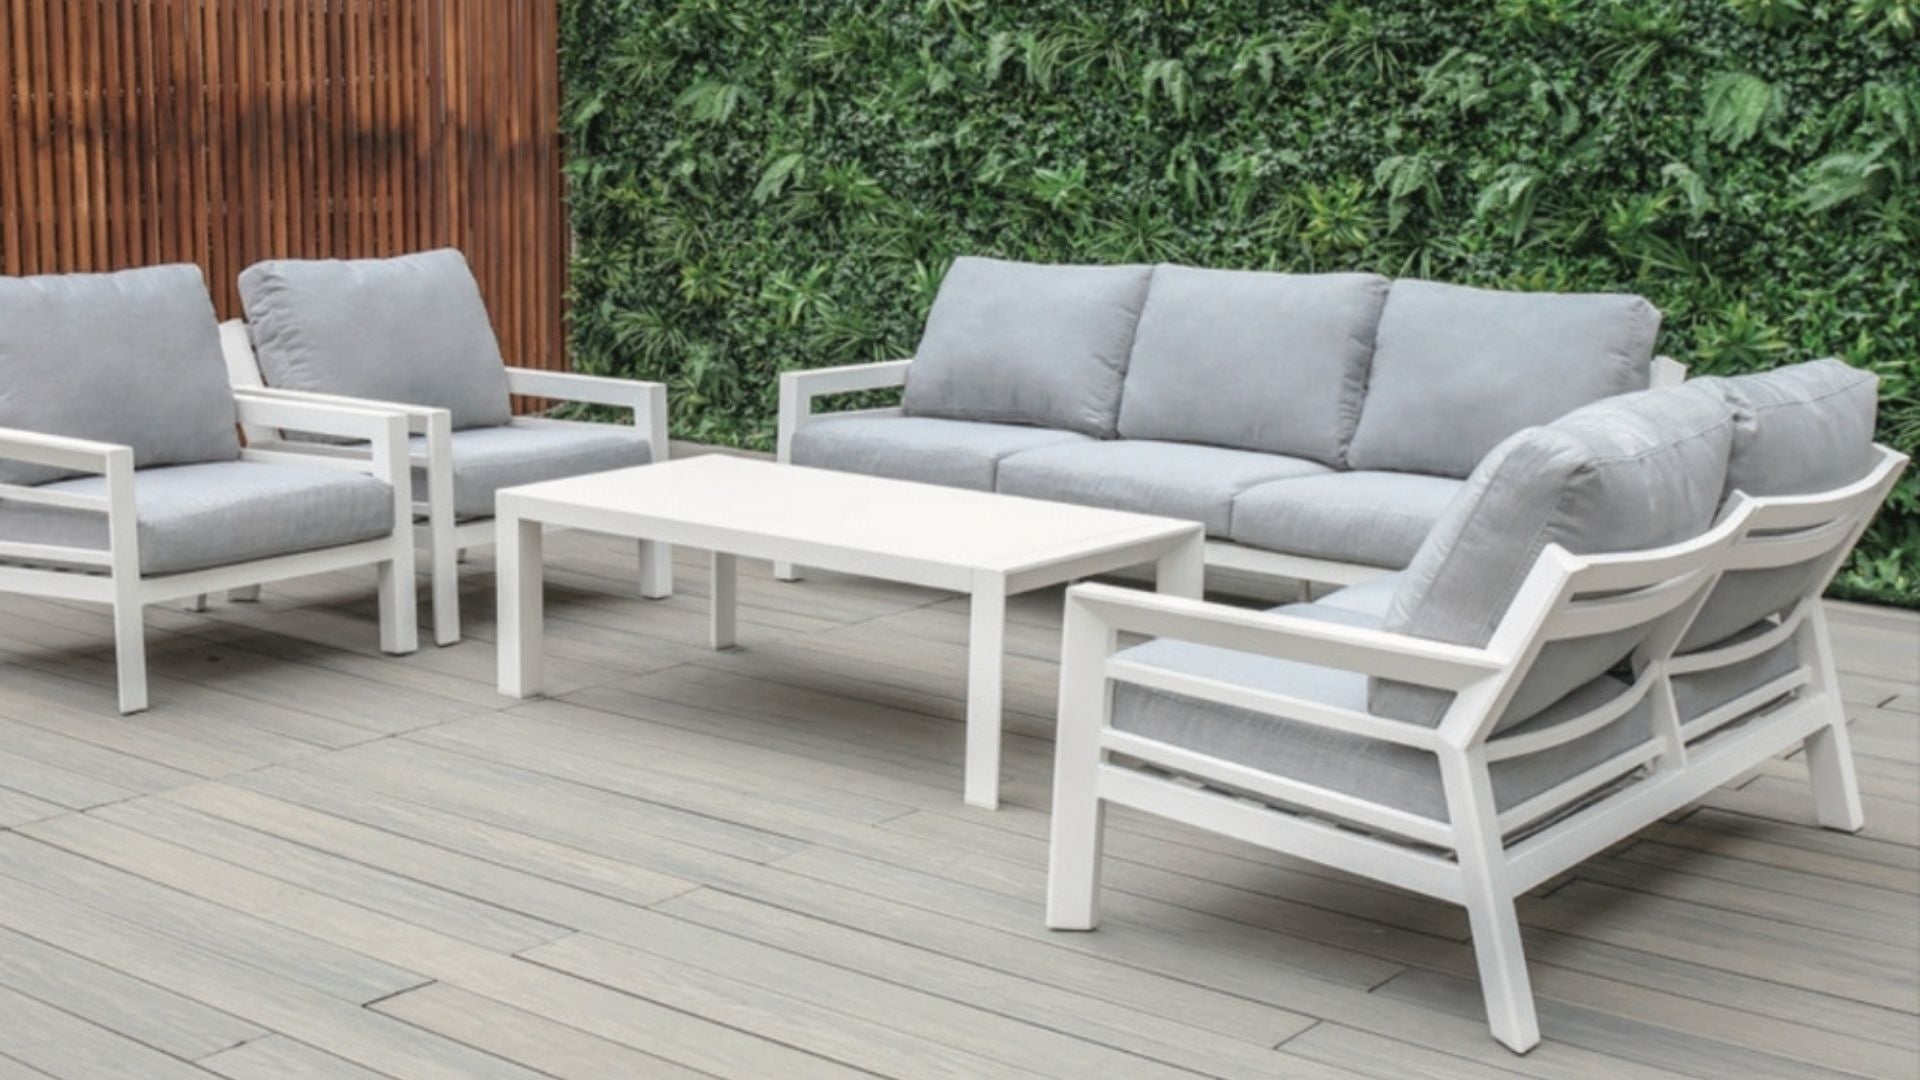 Outdoor entertaining sofa and coffee table set